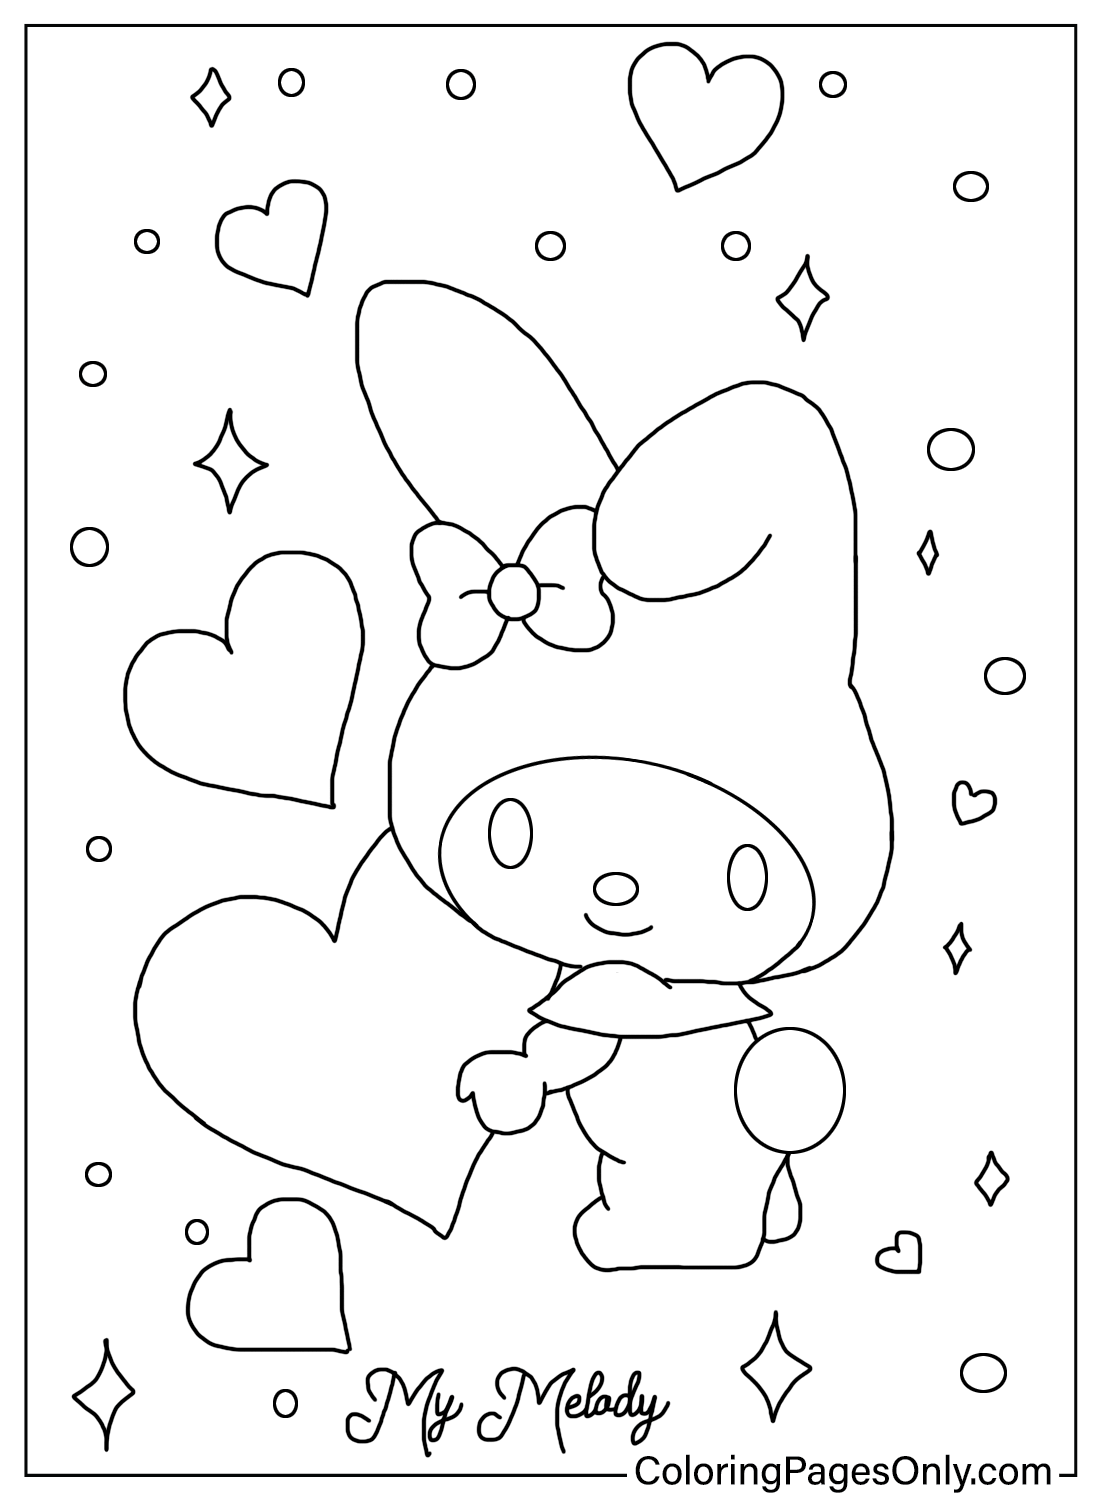 Printable My Melody Coloring Pages Free Printable Coloring Pages